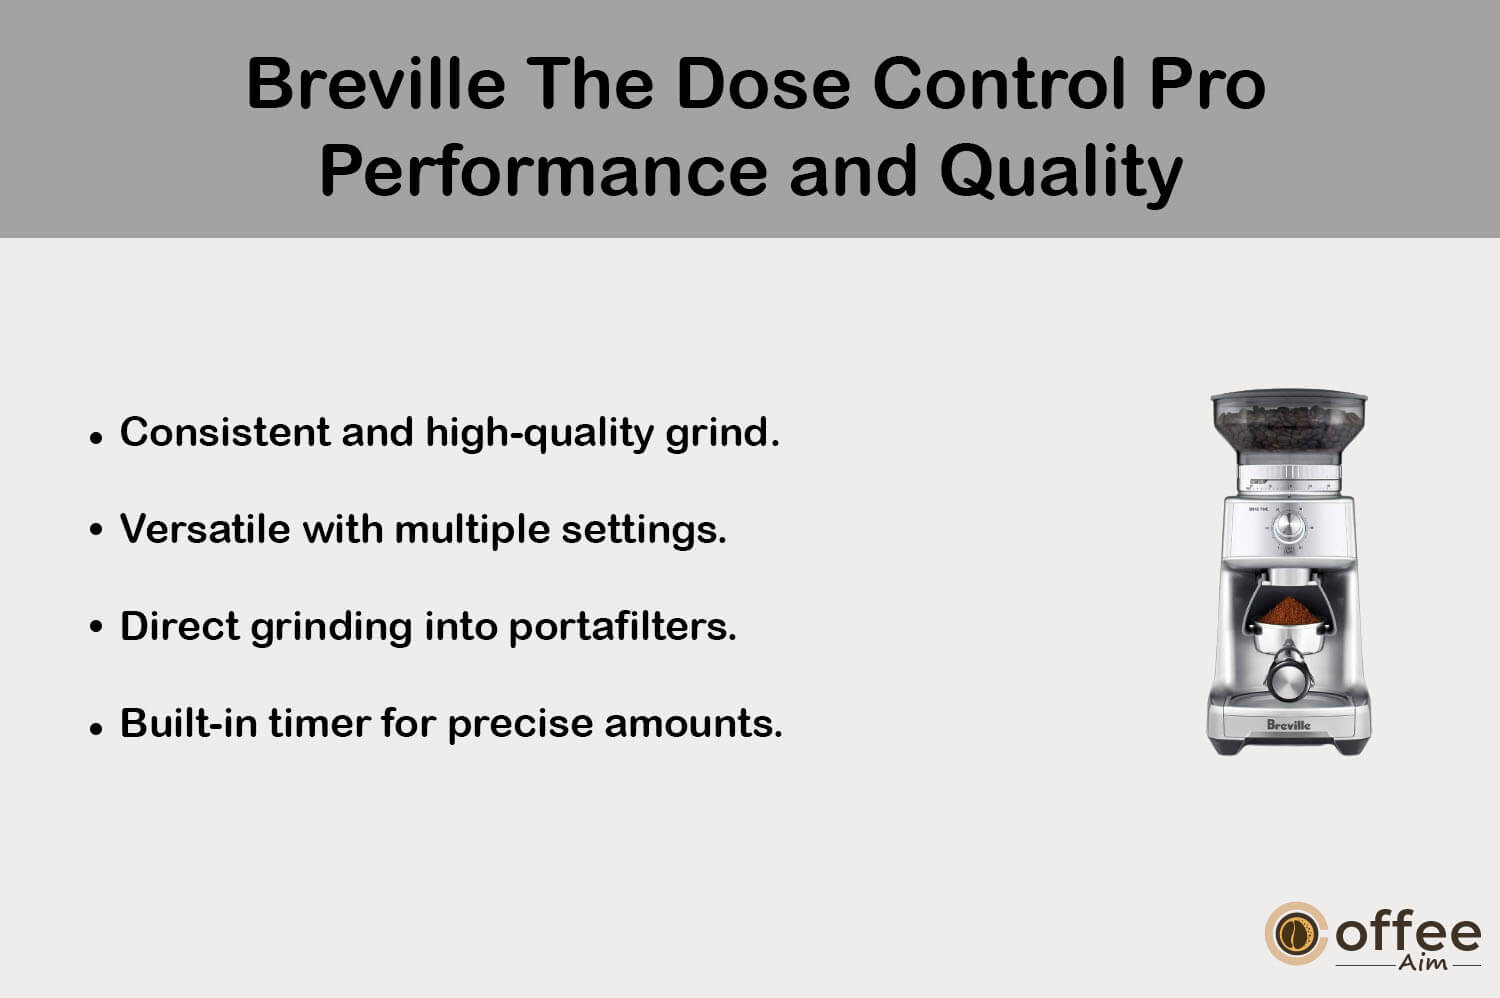 This visual encapsulates the essence of the "Breville The Dose Control Pro" in terms of its performance and quality, a snapshot that defines its prowess within the context of the comprehensive review titled "Breville The Dose Control Pro Review."